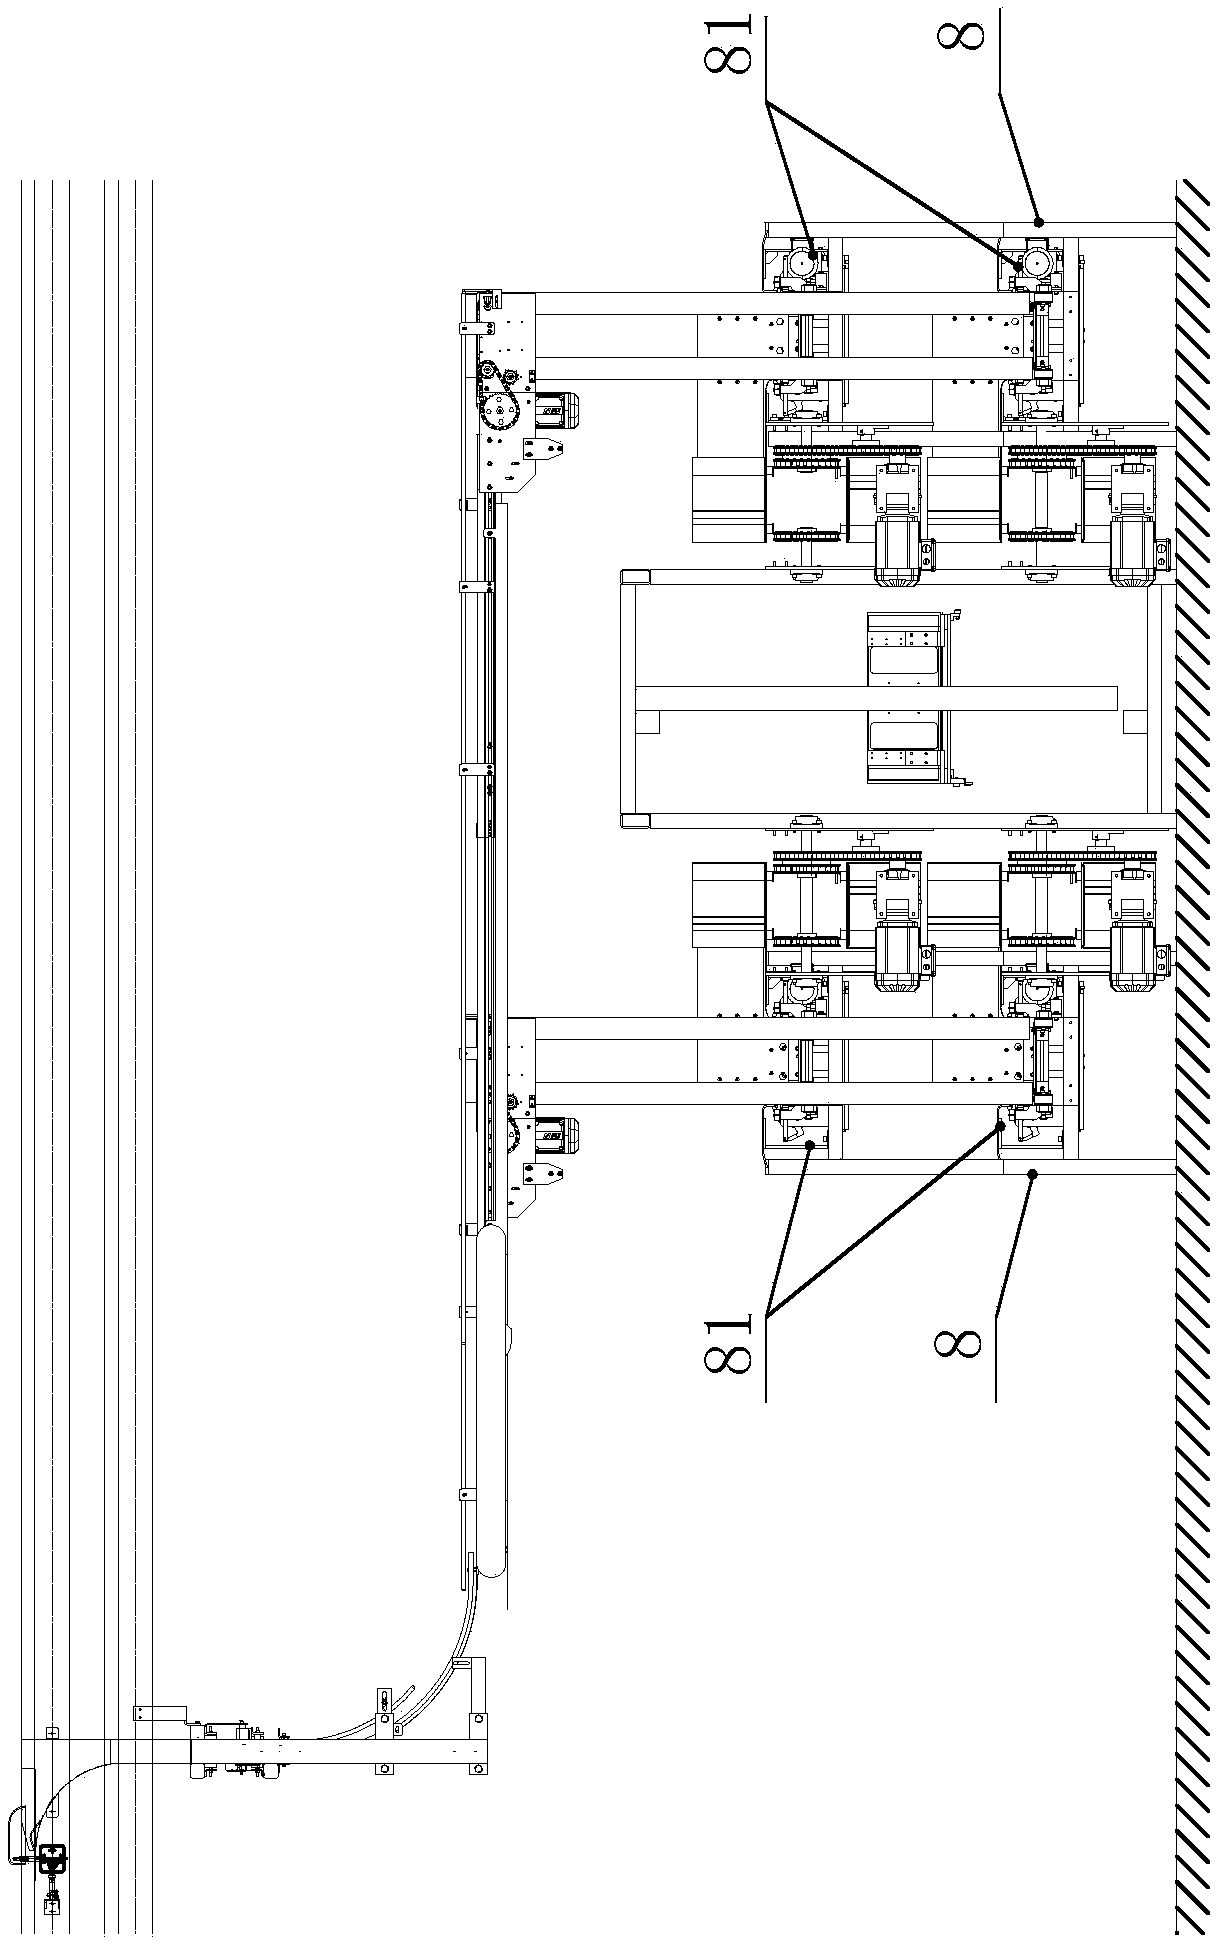 Single butt-joint boxing and sealing system and method for multiple brands of cigarettes